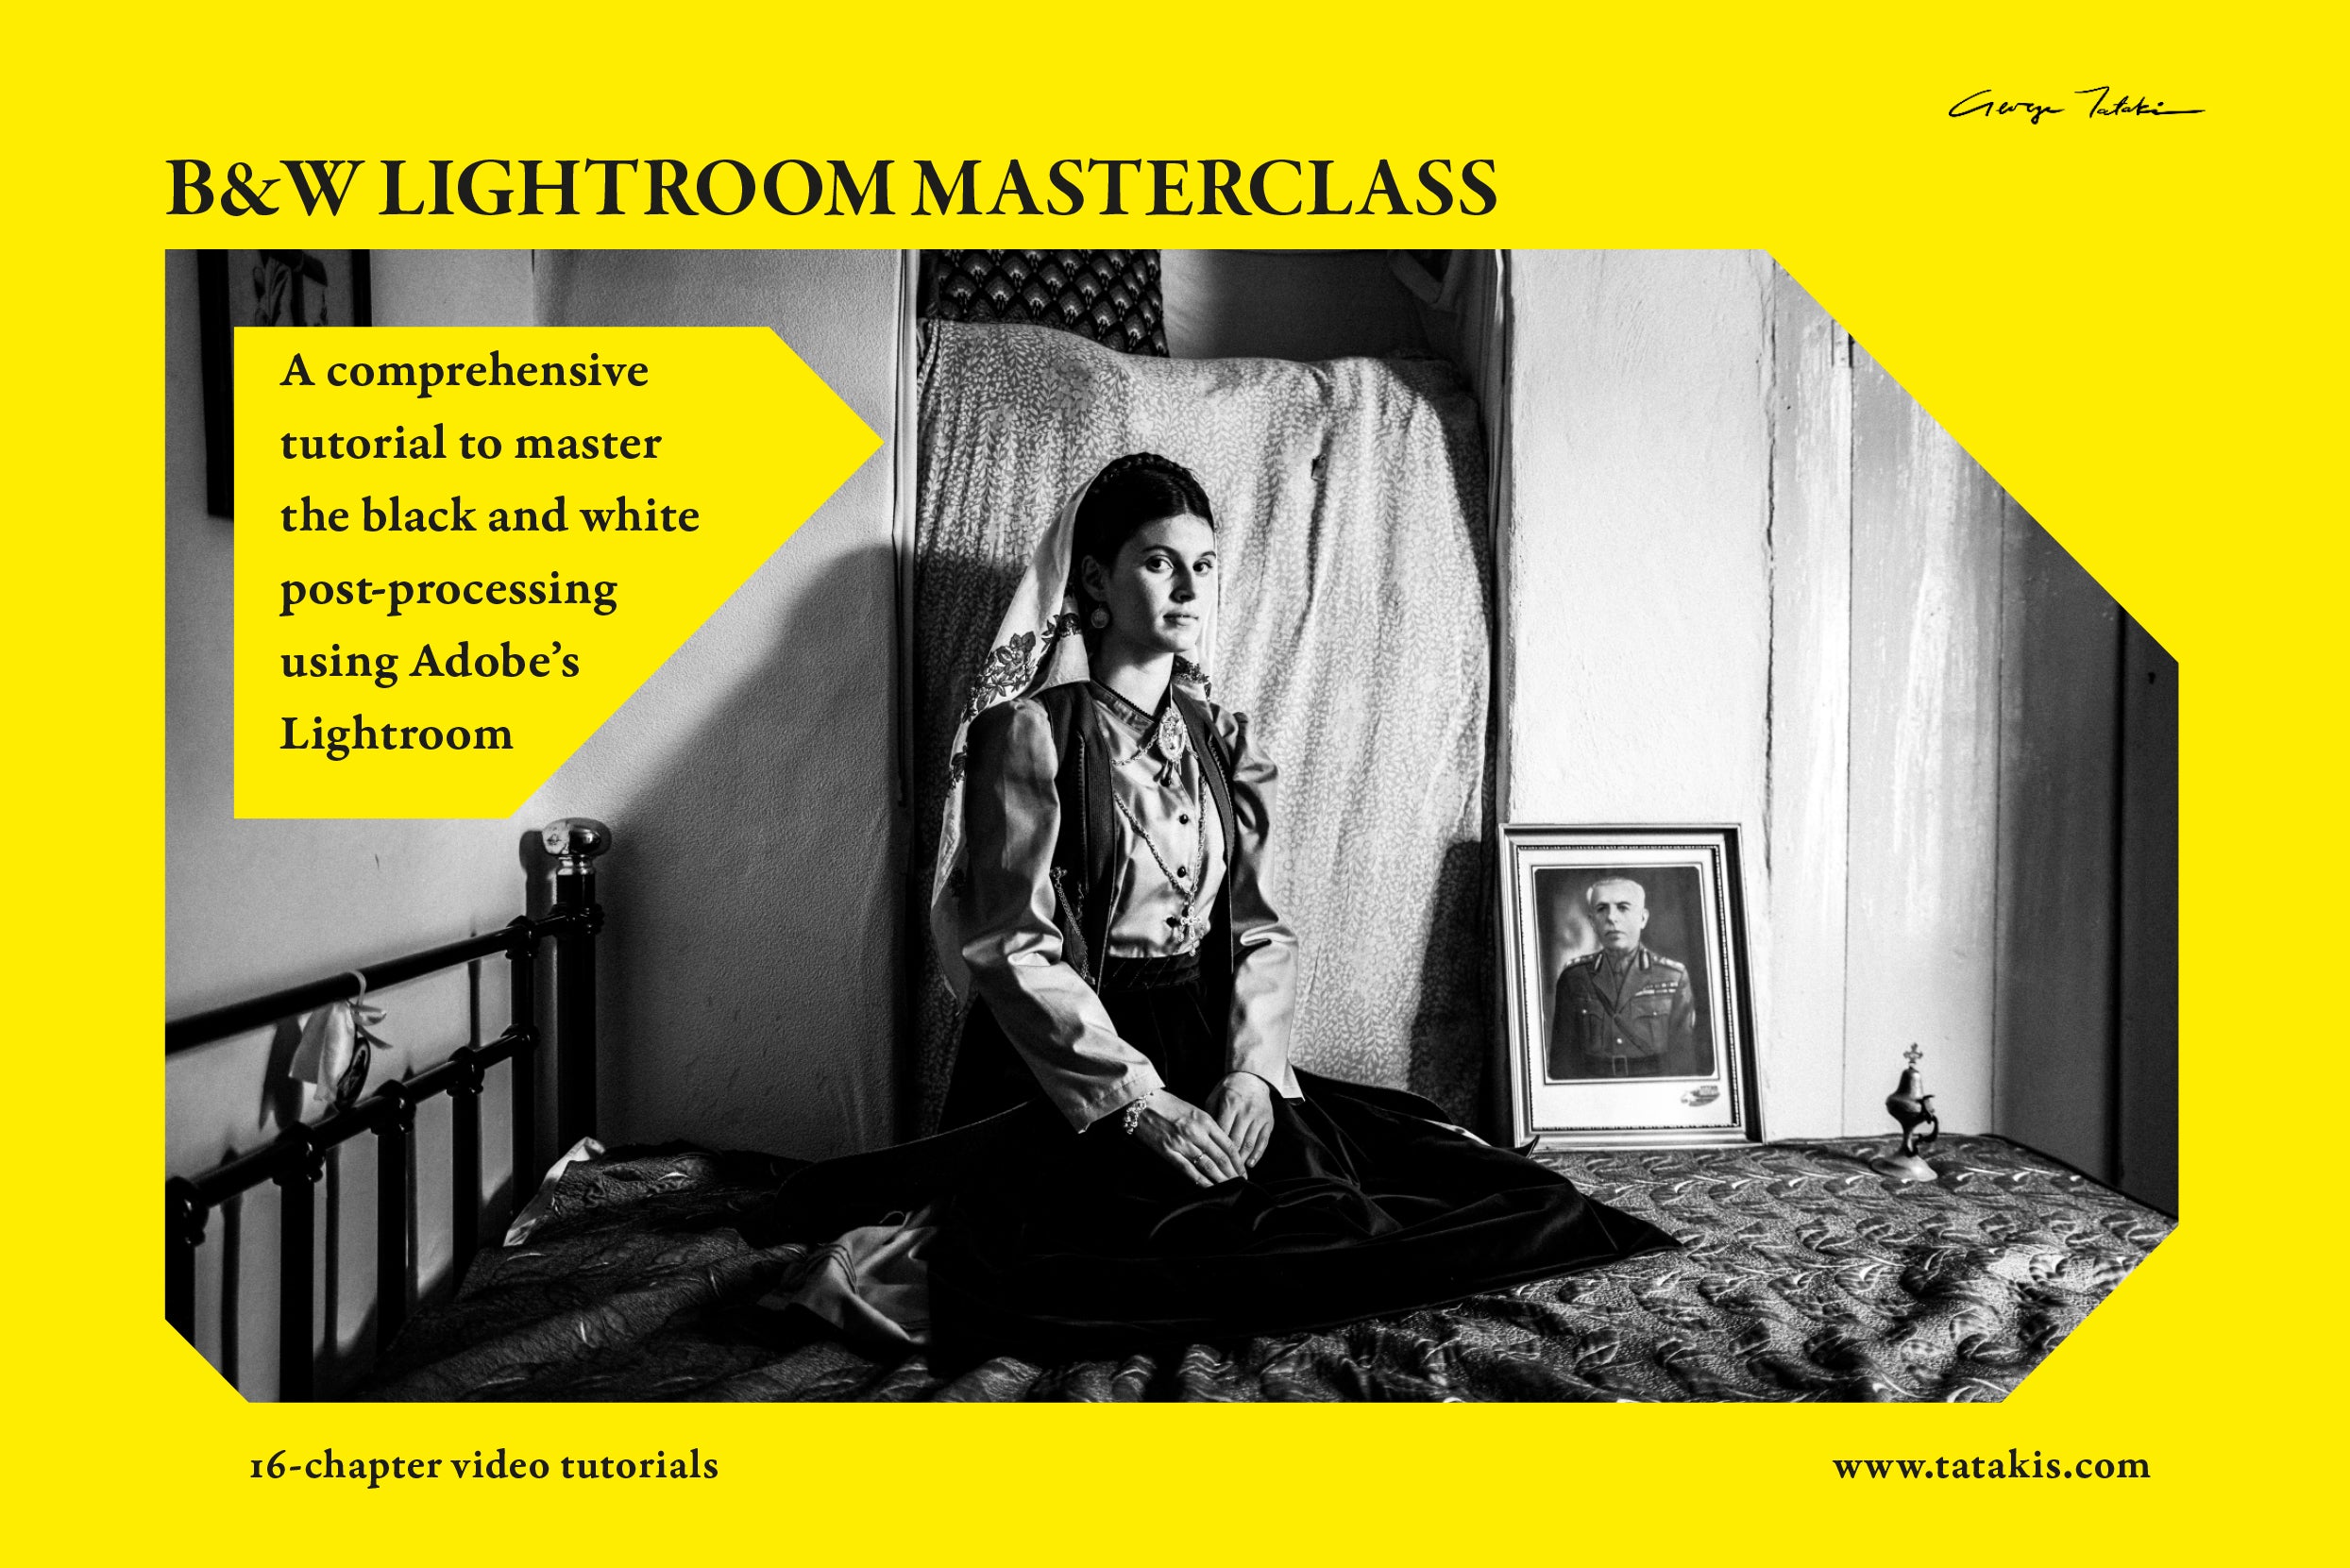 Load video: Lightroom Black and White Masterclass by George Tatakis